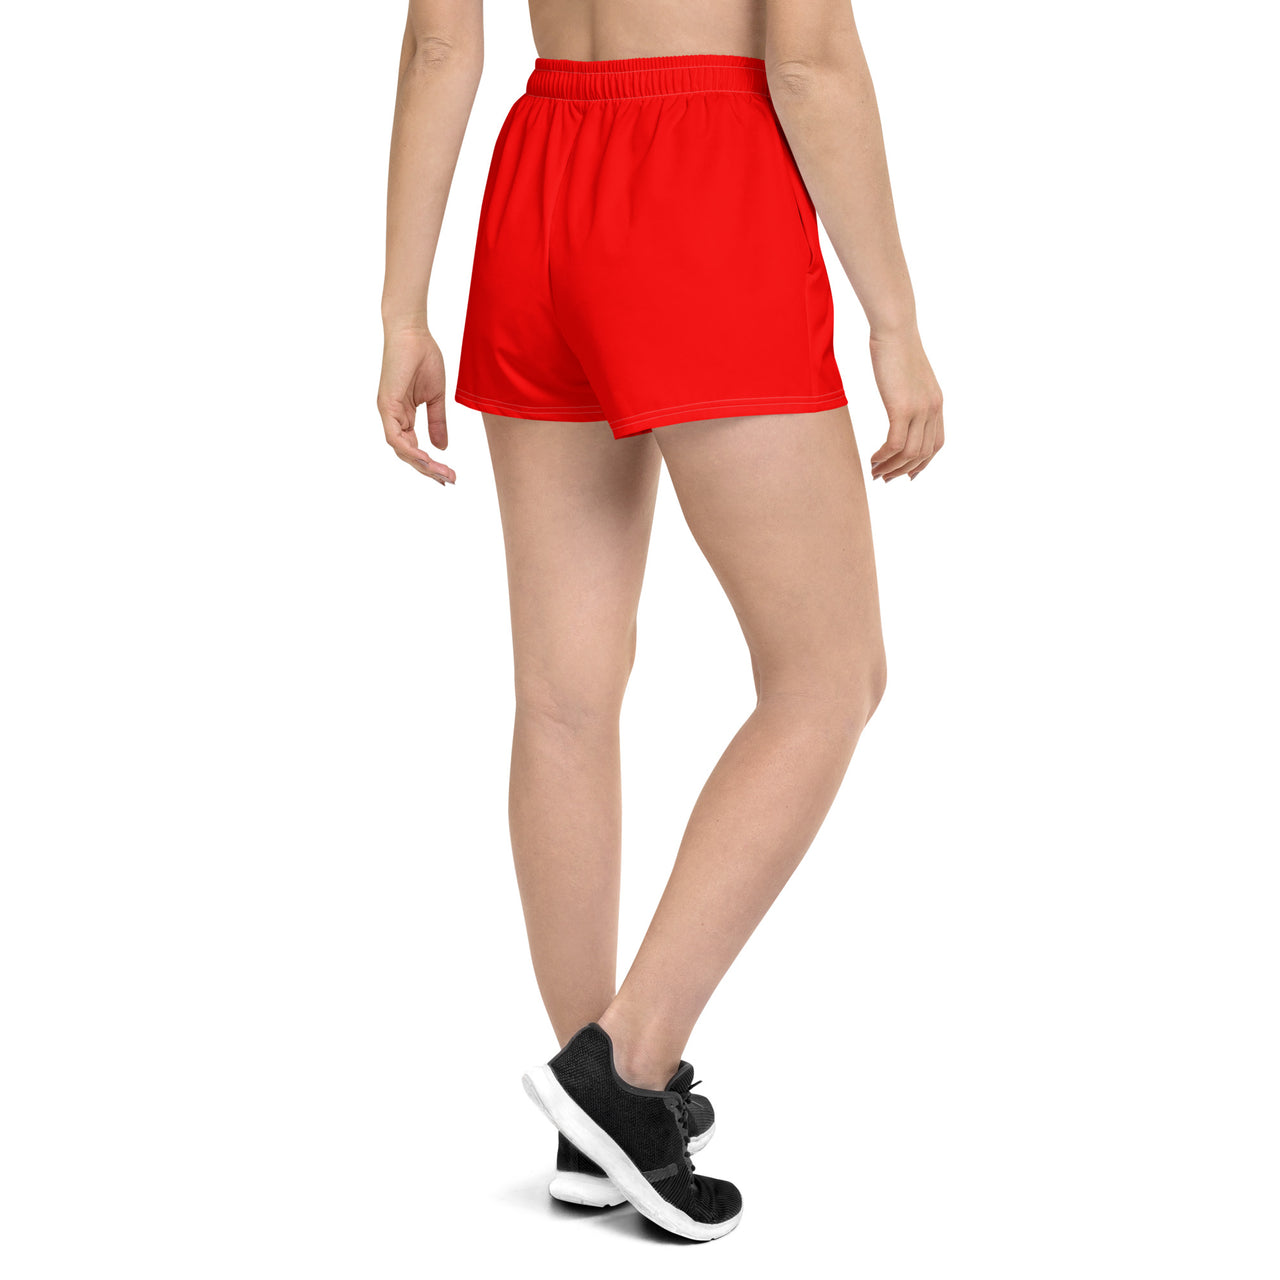 Women’s Recycled Solid Athletic Shorts - Red SHAVA CO